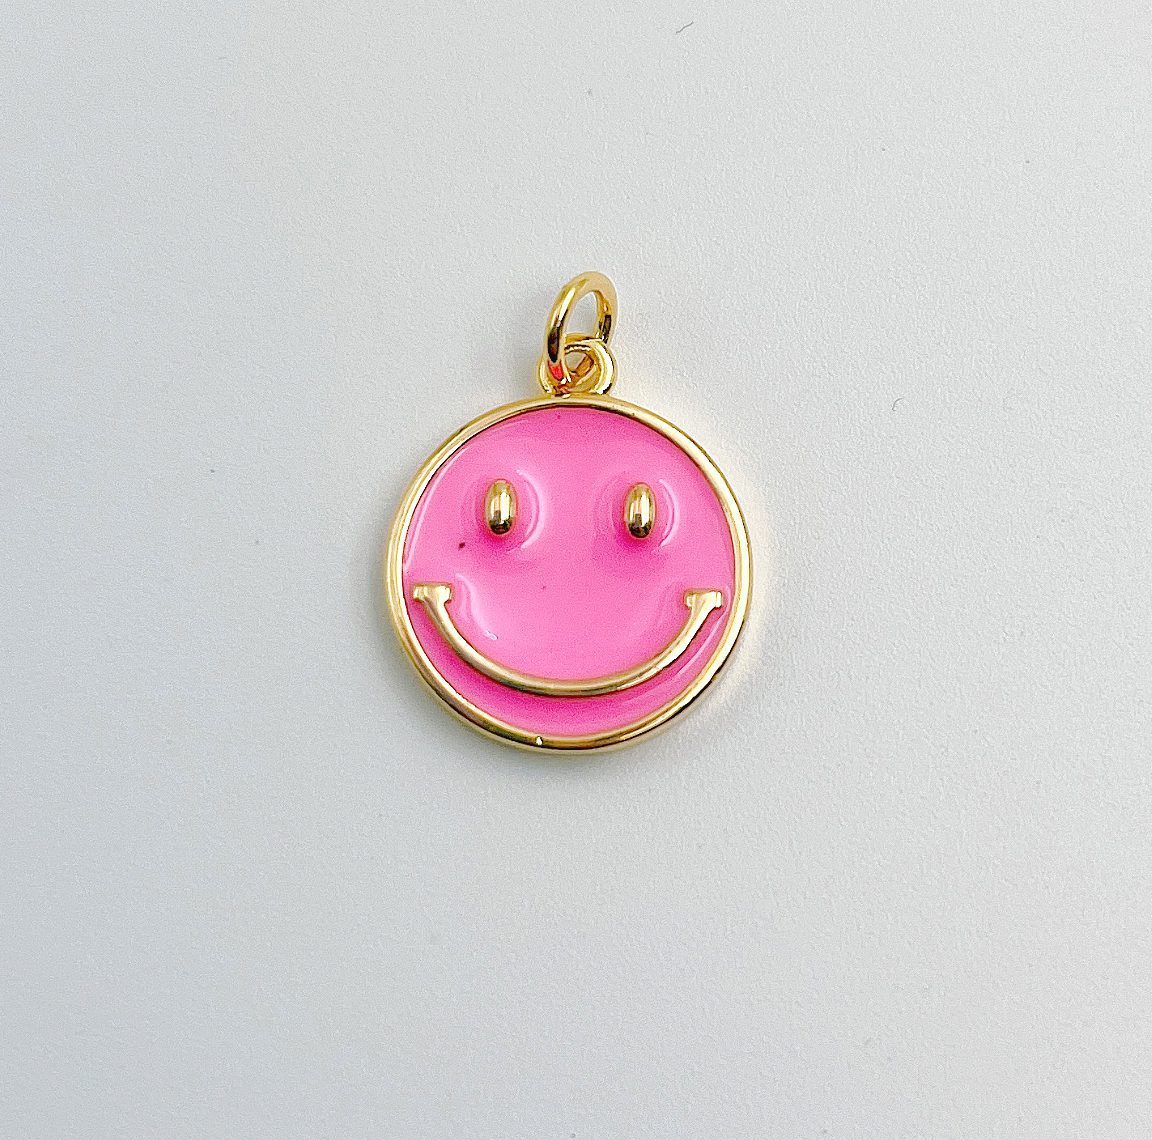 14K Gold Filled Happy Jewelry Pendant Craft Supplies CP1298 Pink Enamel Charm Necklace Bracelet Charm Sweet Charms Red Lollipop Charms